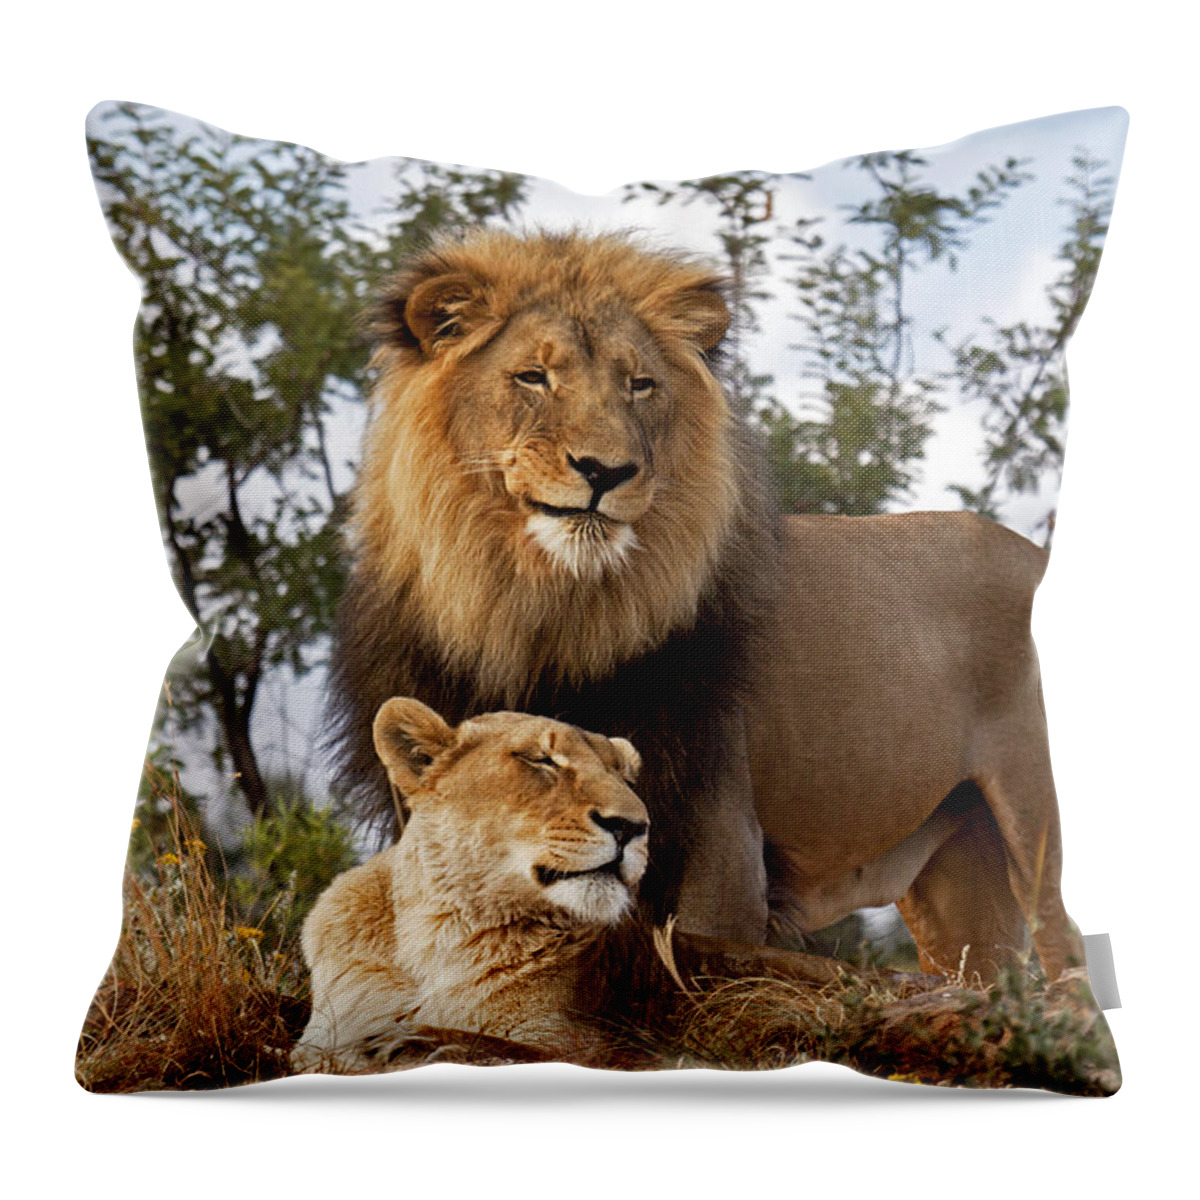 Nis Throw Pillow featuring the photograph African Lion And Lioness Botswana by Erik Joosten